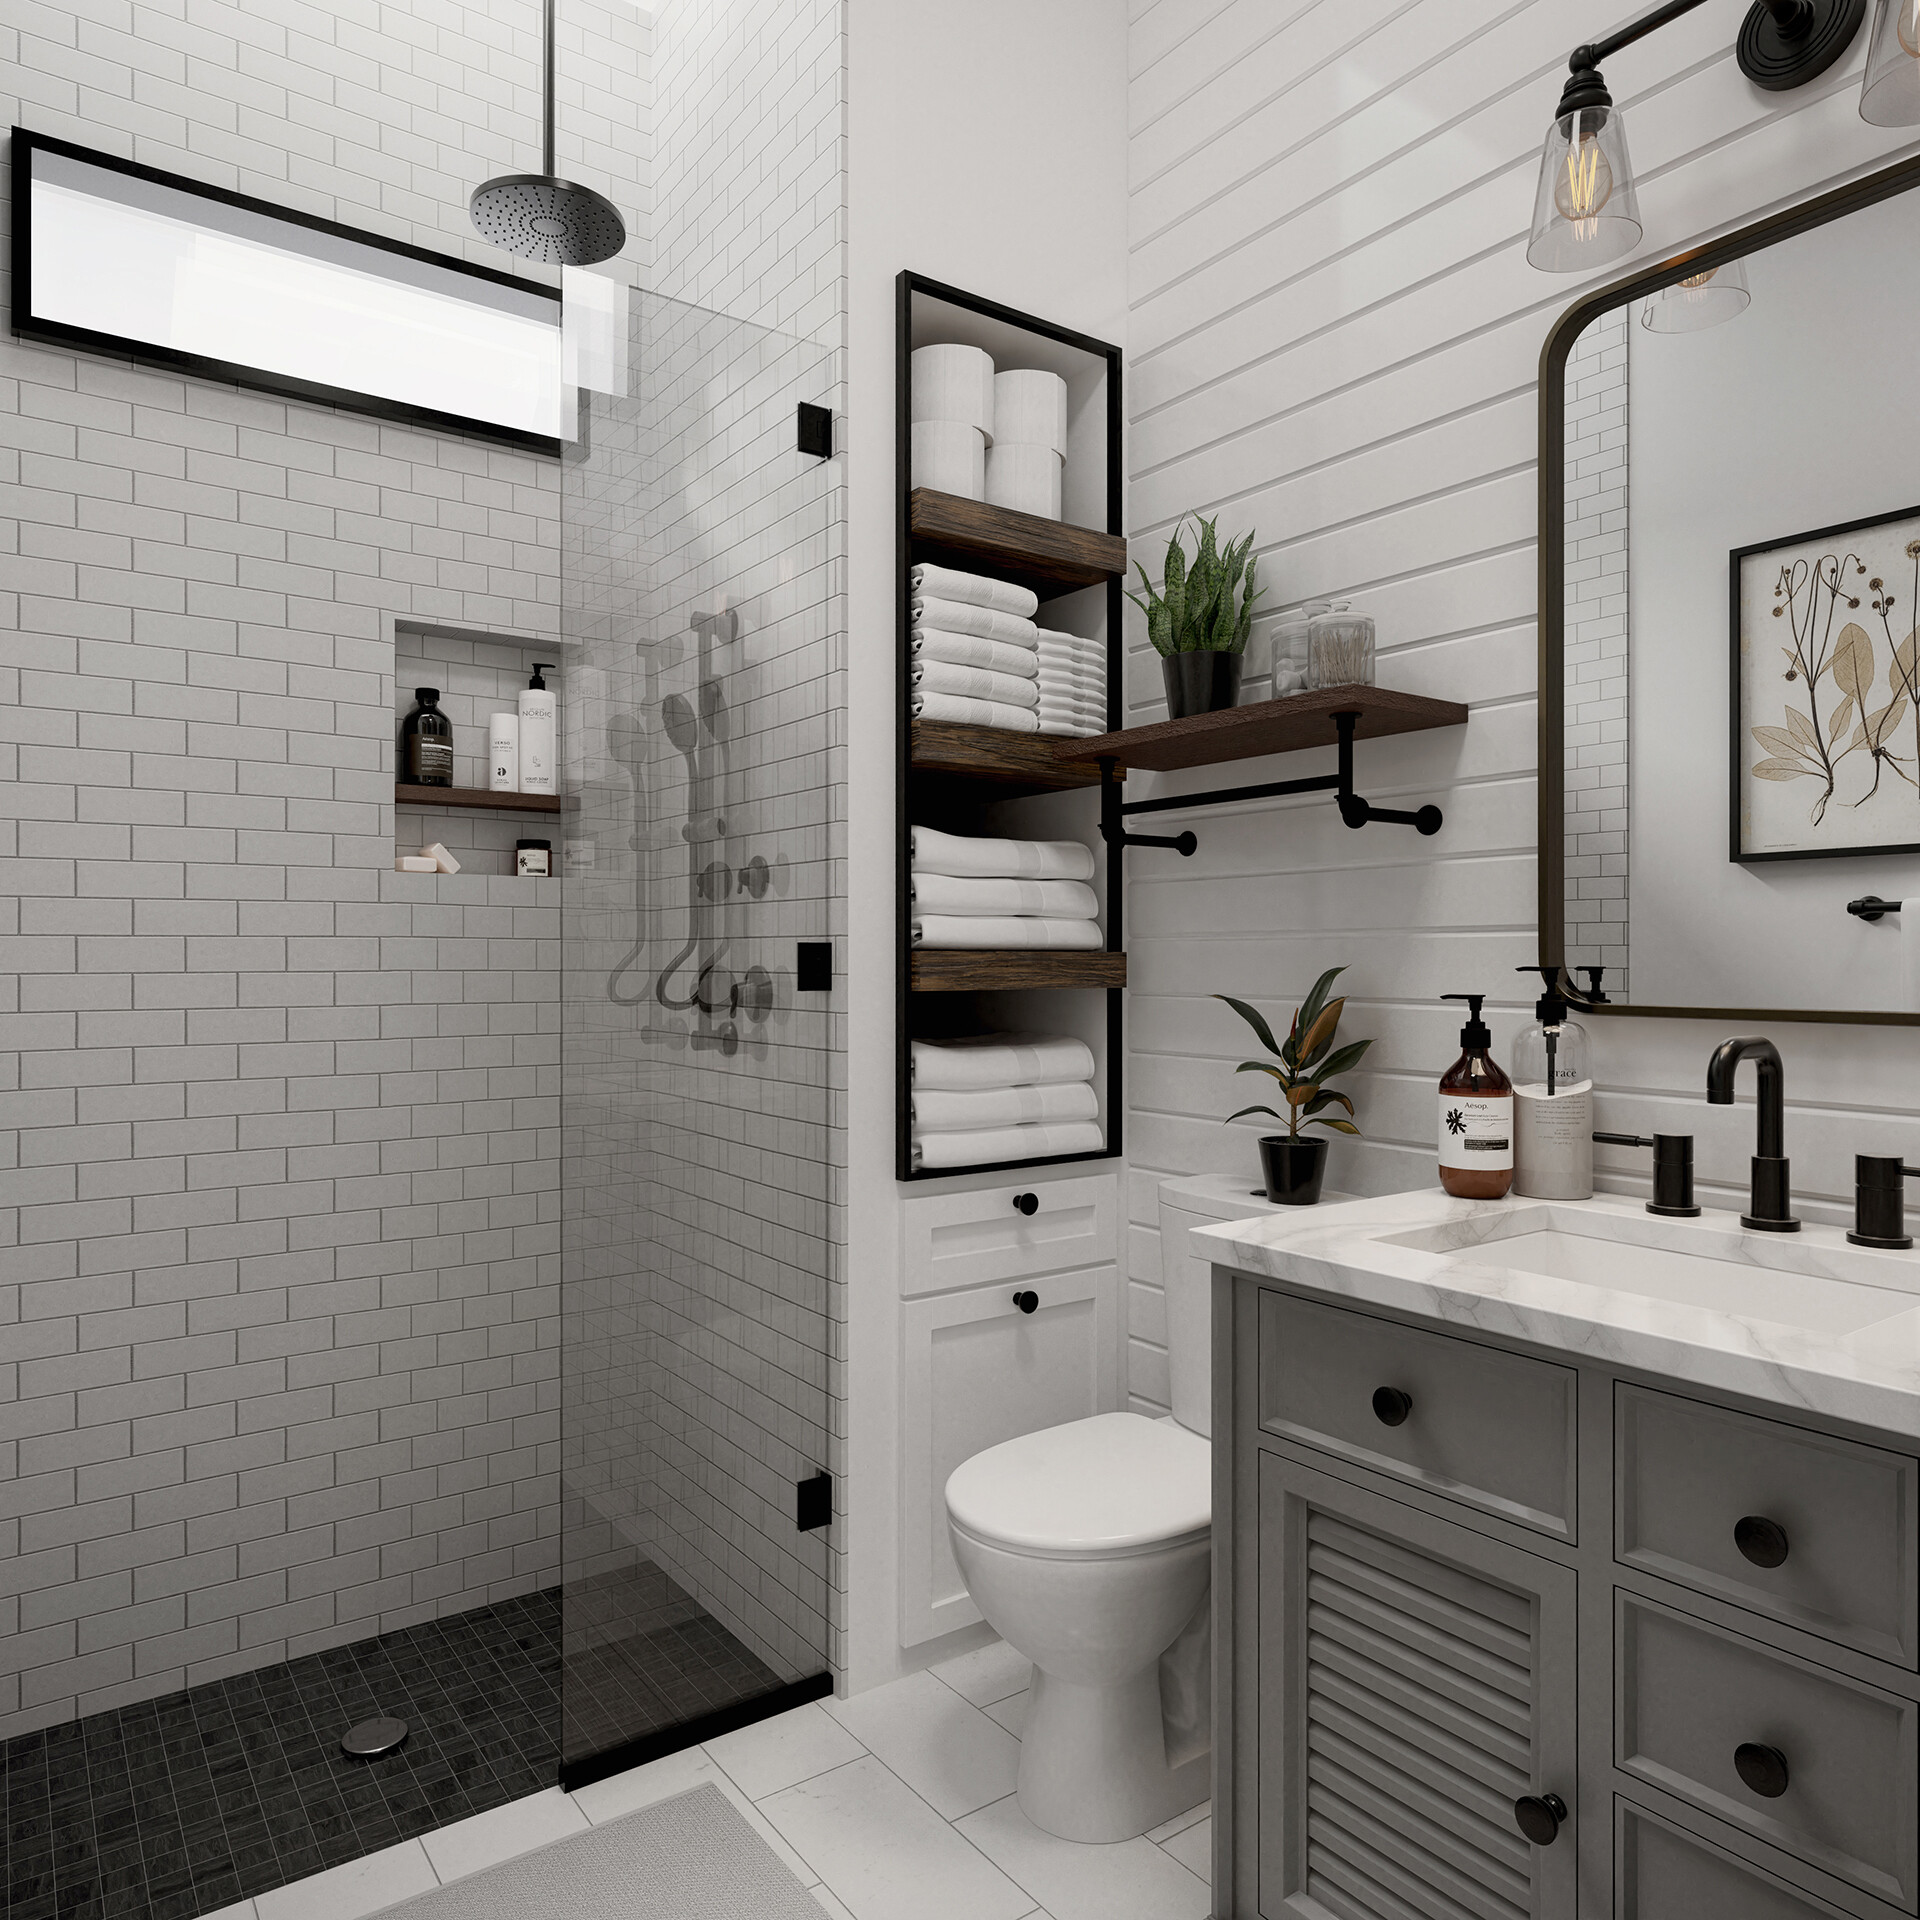 Tiny Bathroom - Farmhouse - Finished Projects - Blender Artists Community